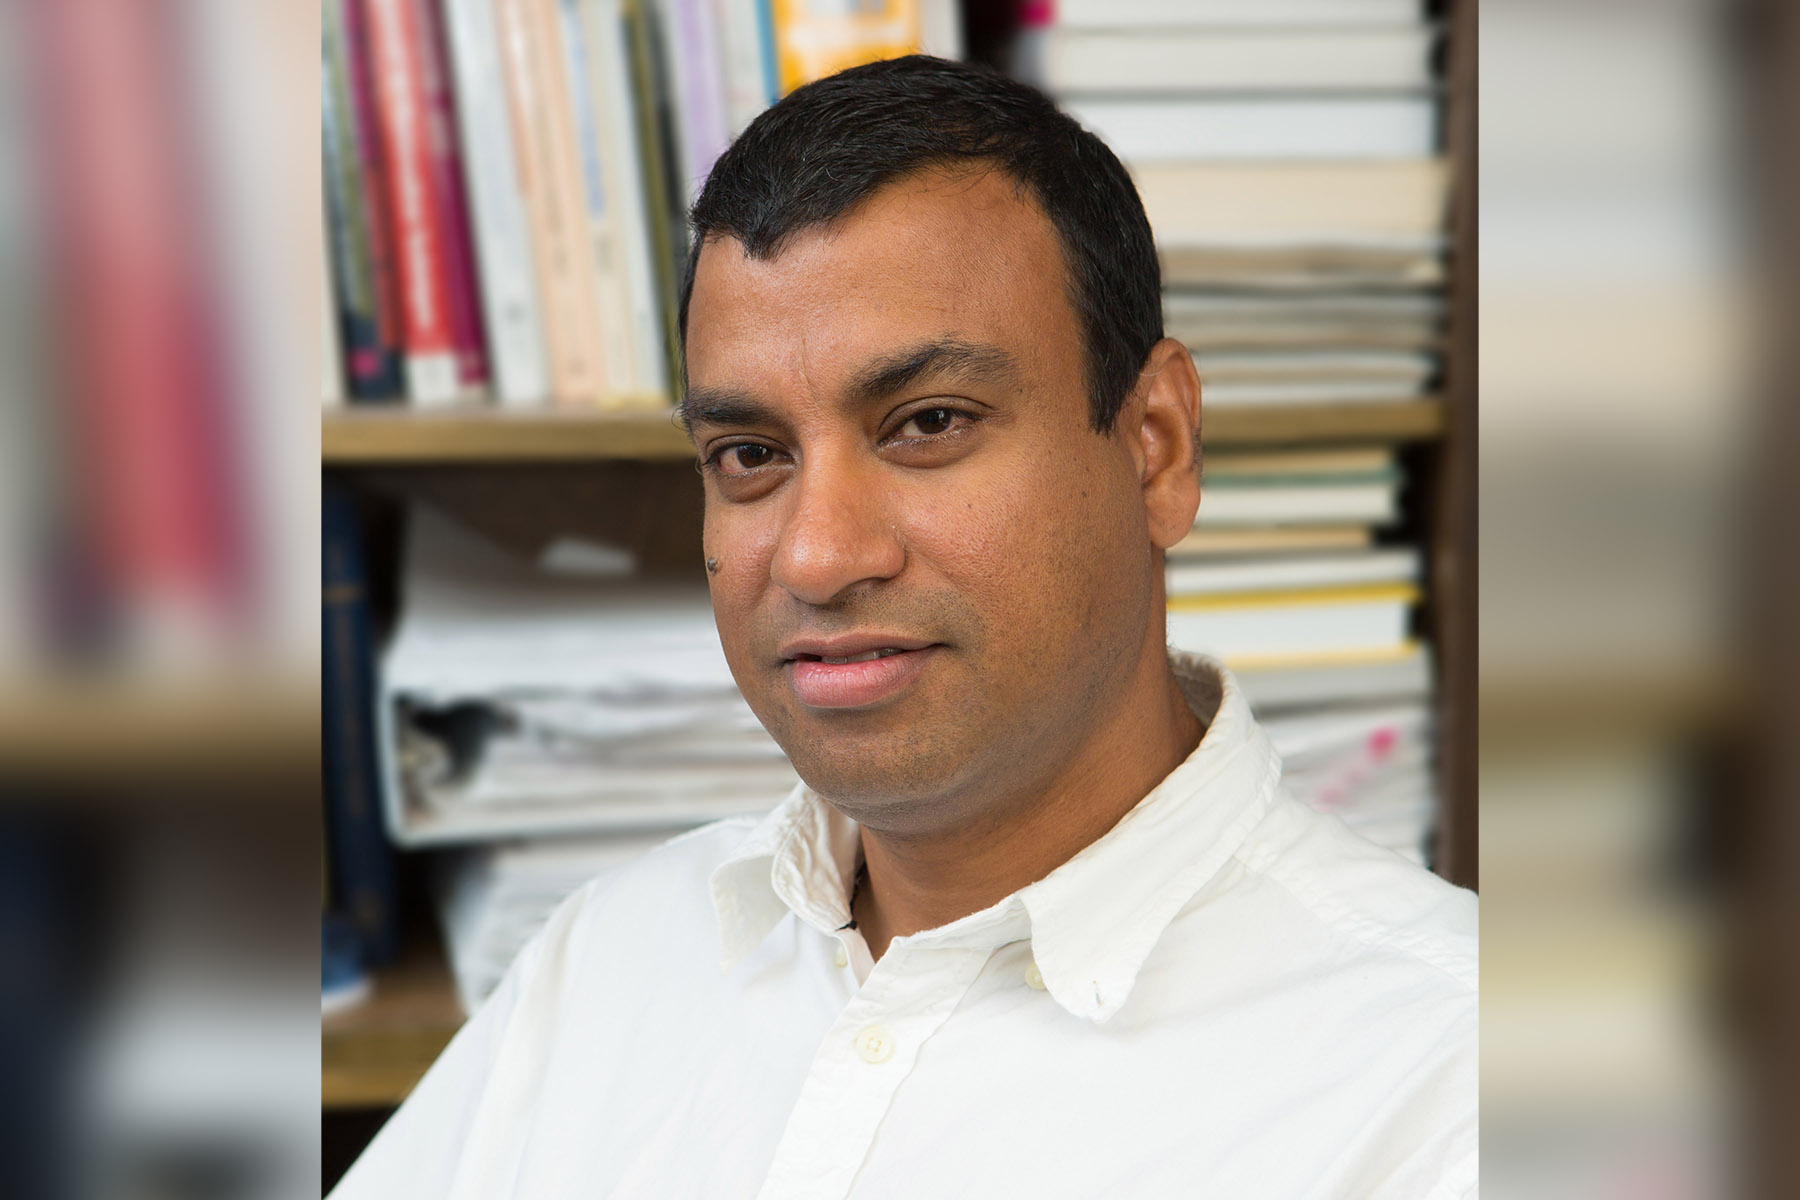 Anuj Srivastava is a distinguished research professor in the Department of Statistics.